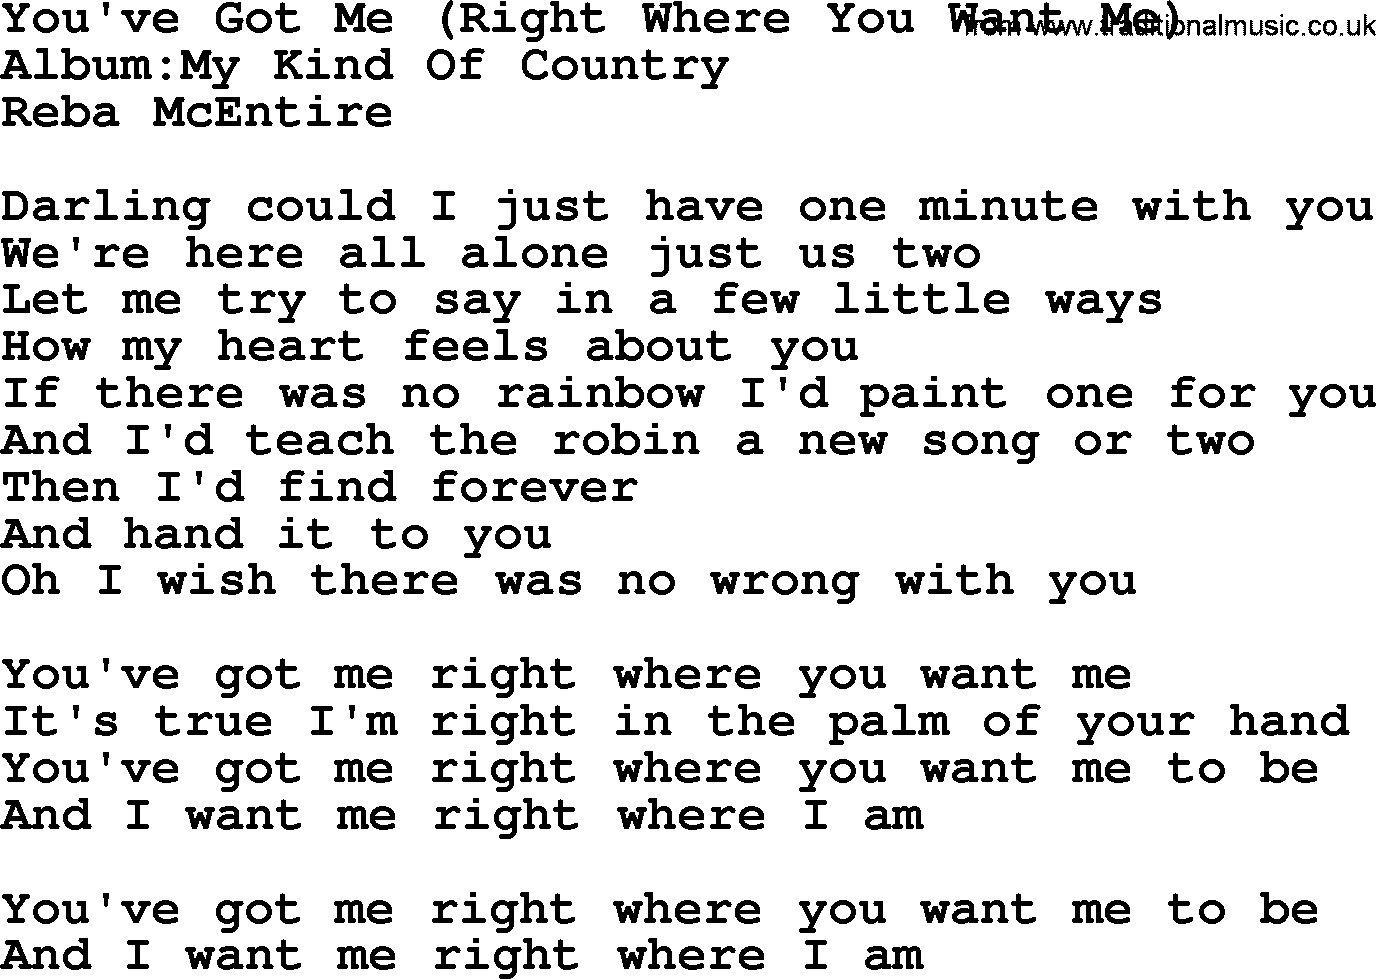 Reba McEntire song: You've Got Me Right Where You Want Me lyrics